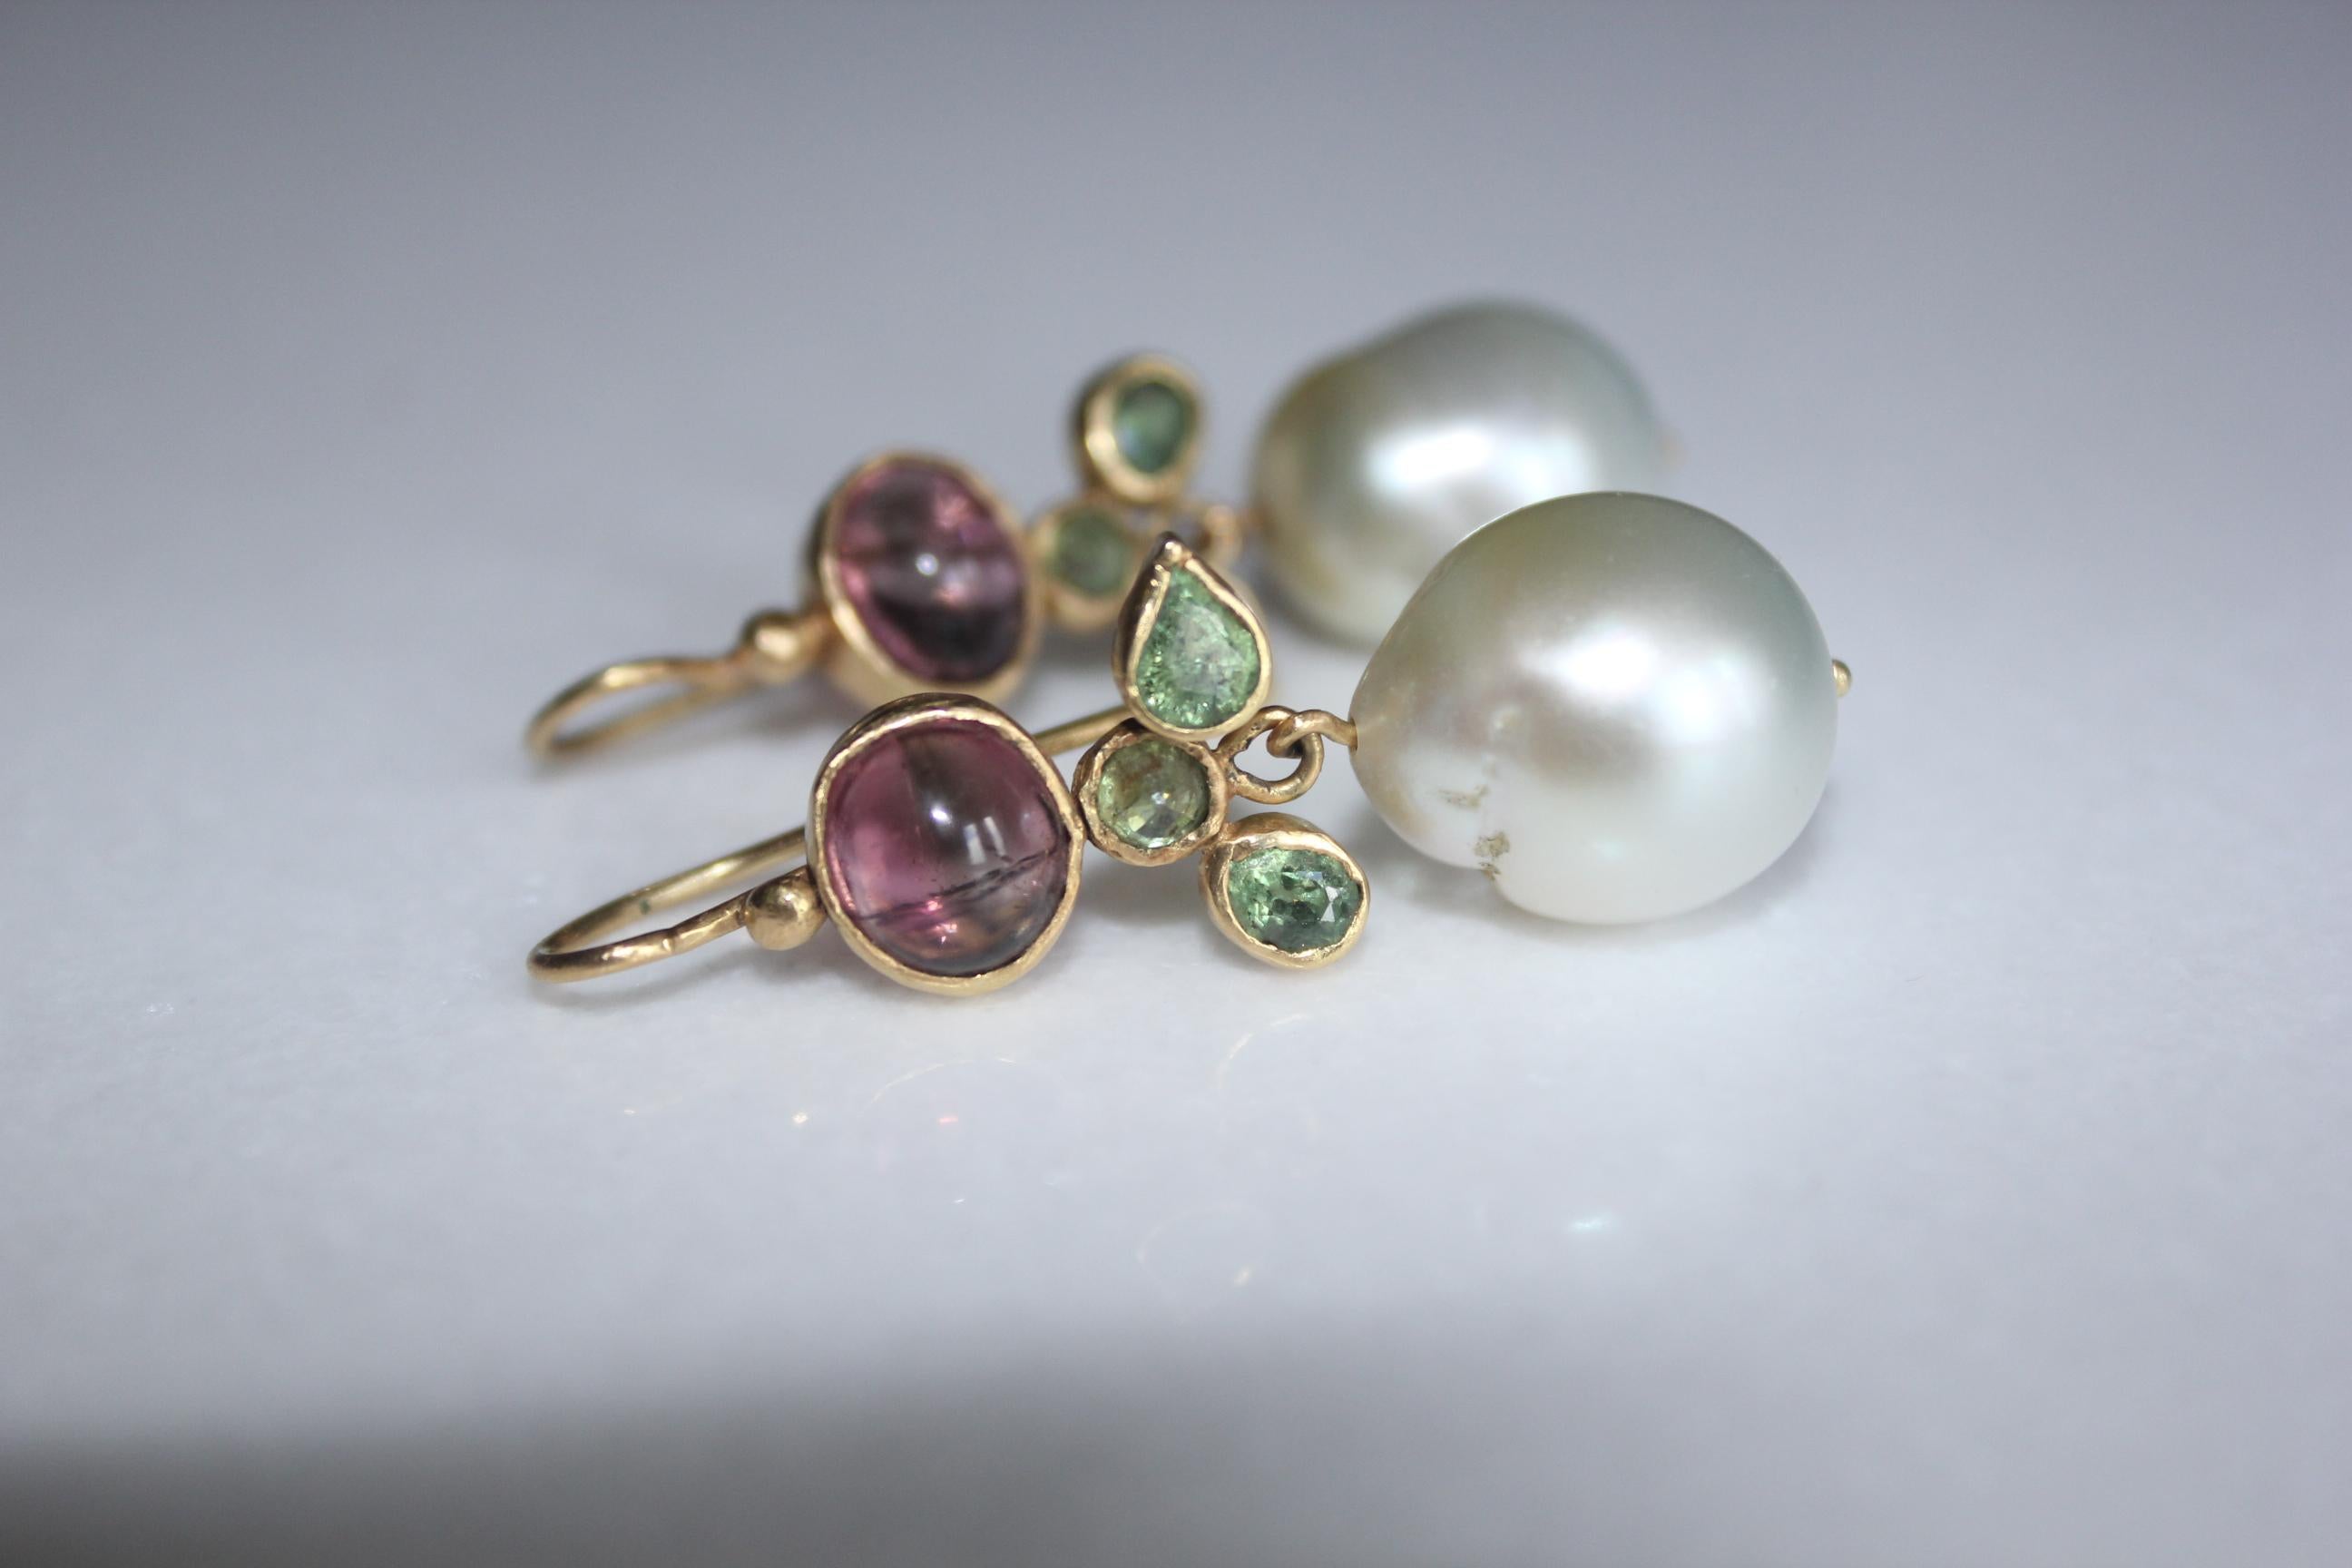 Rhododendron Earrings. Beautiful one of a kind handmade 21K gold dangle drop earrings with South Sea pearls, resembling the flowering rhododendrons. Pink tourmalines and green demantoid garnets are bezel set in 21k gold. A beautiful cream white